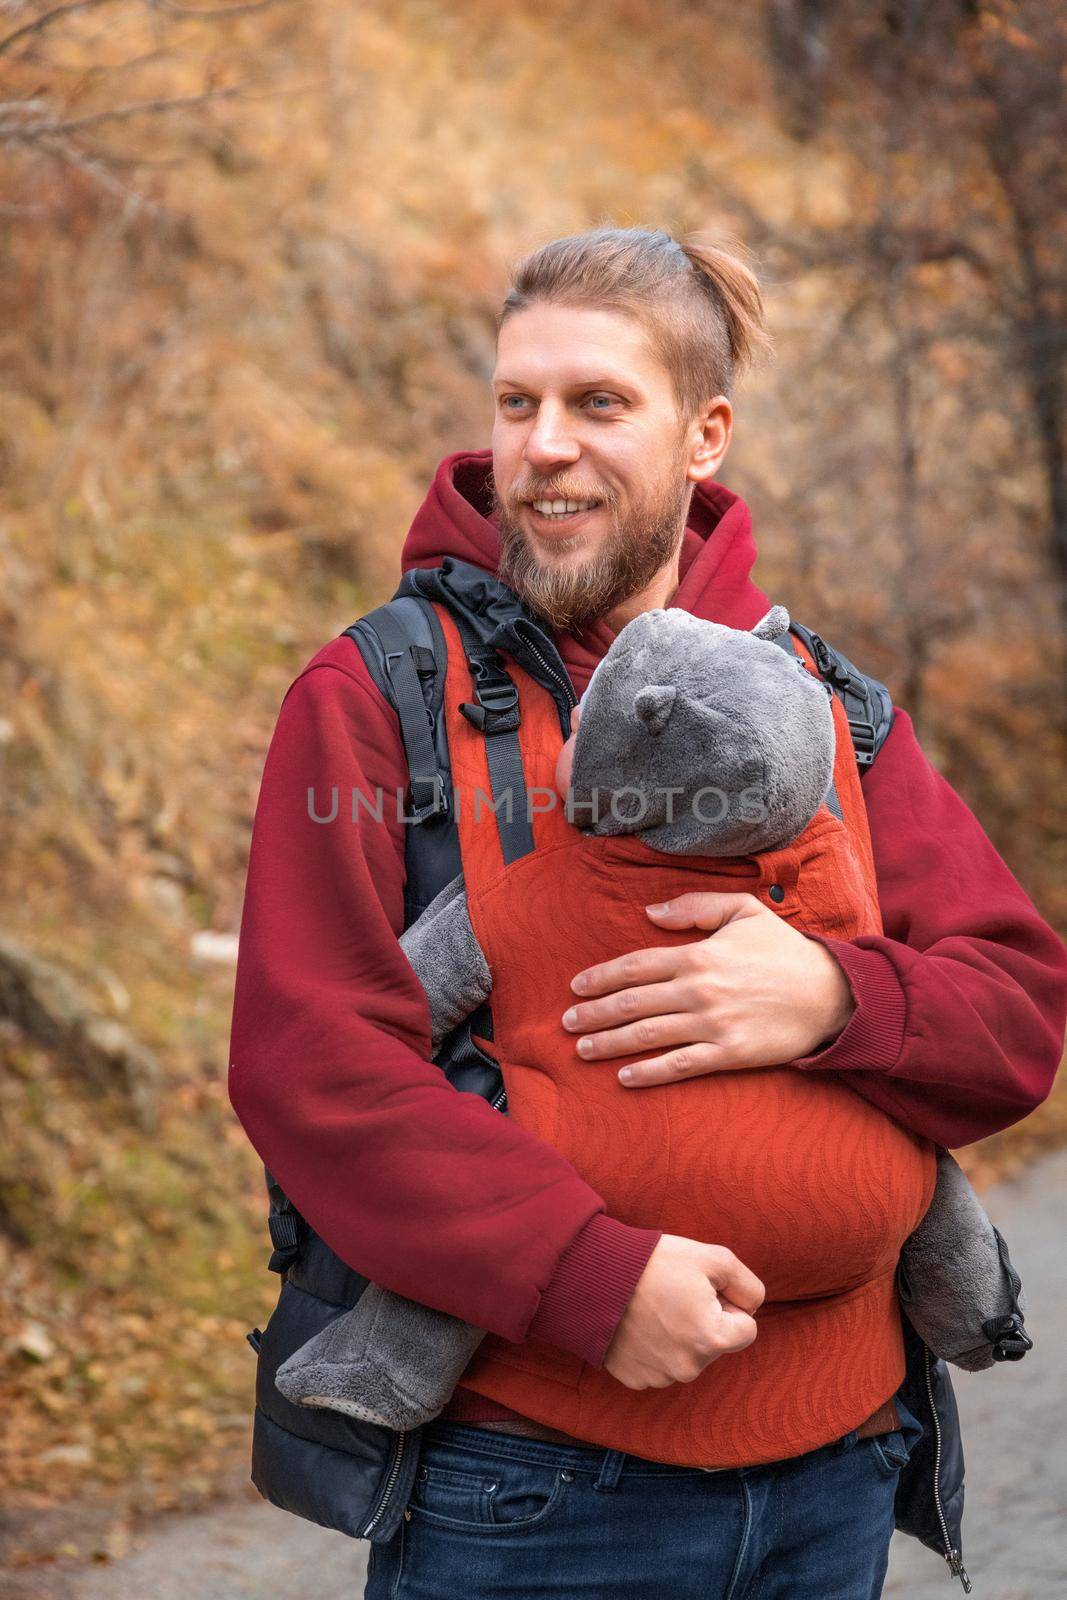 Adorable smiling bearded babywearing father with his baby in sling autumn walking.